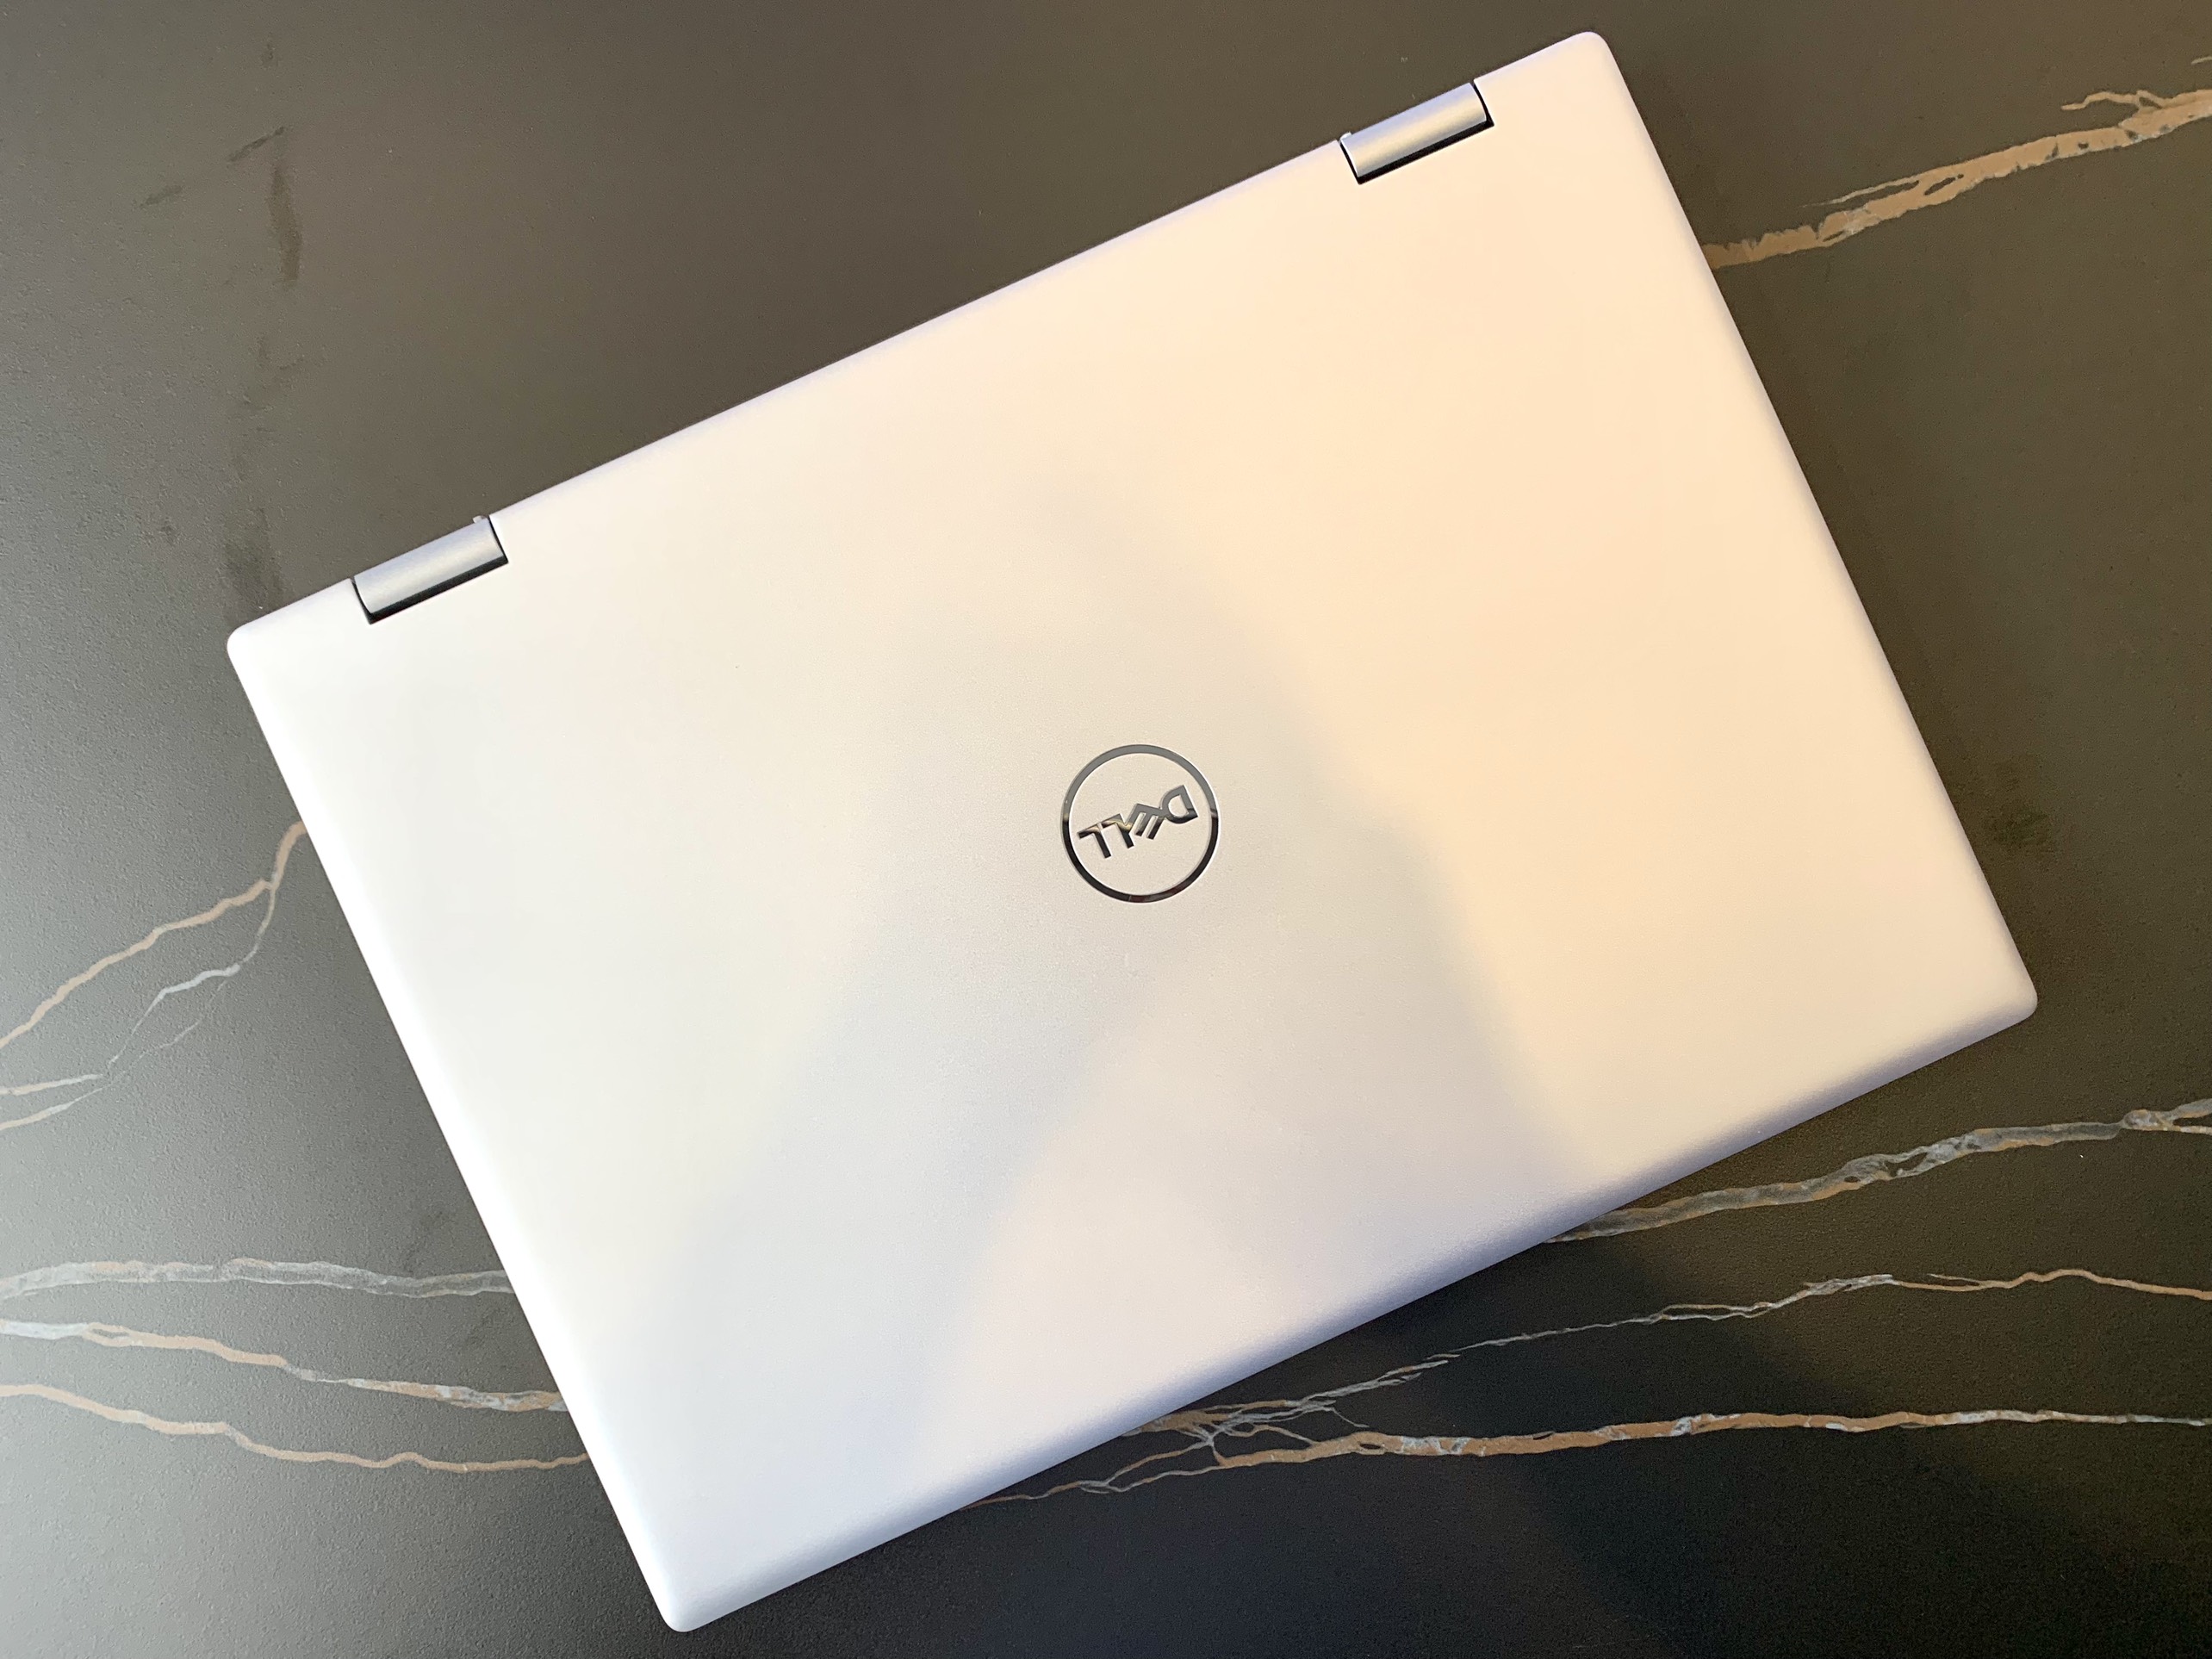 Thiết kế laptop dell inspiron 7420 2in1